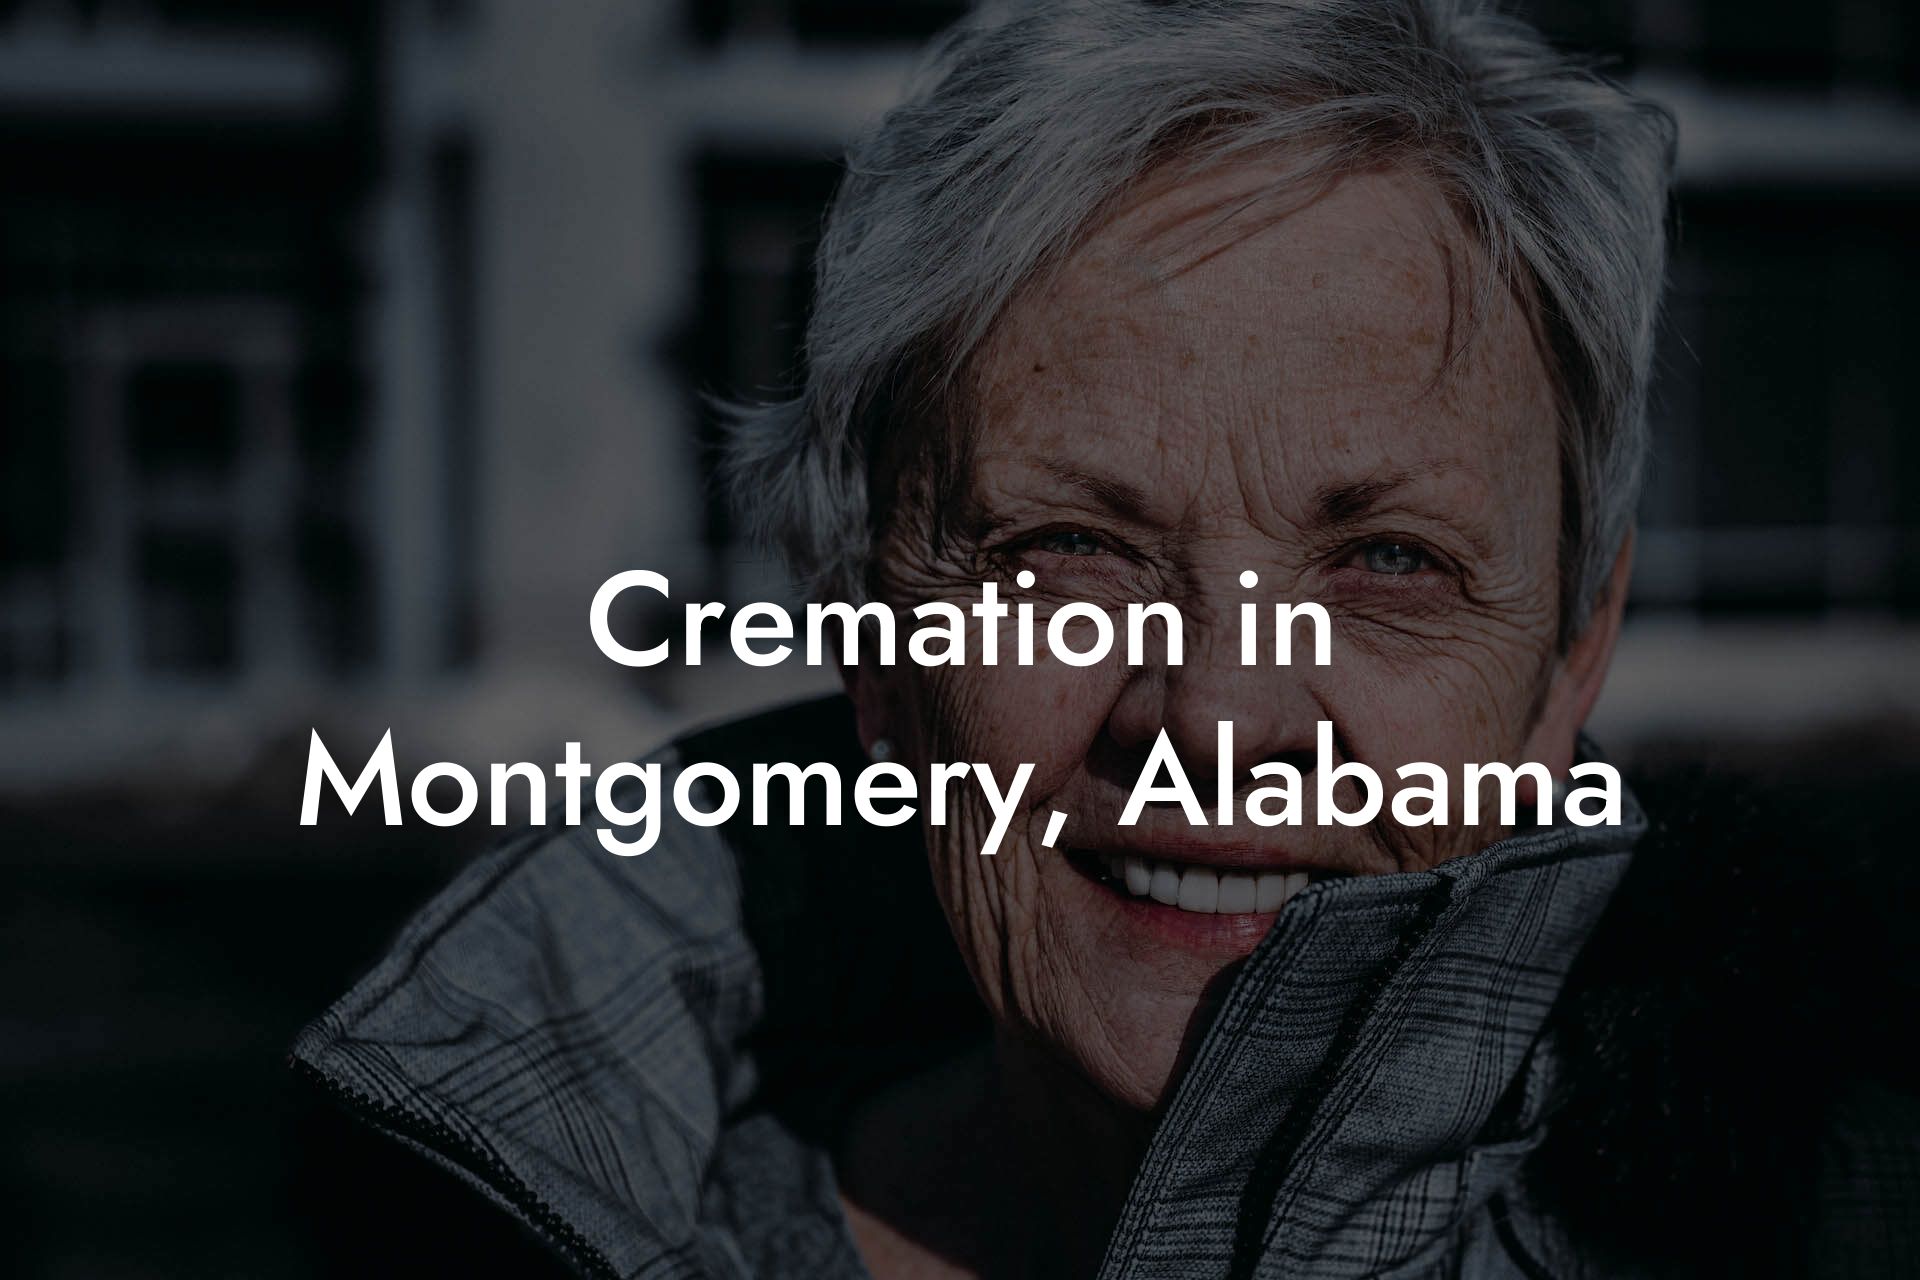 Cremation in Montgomery, Alabama